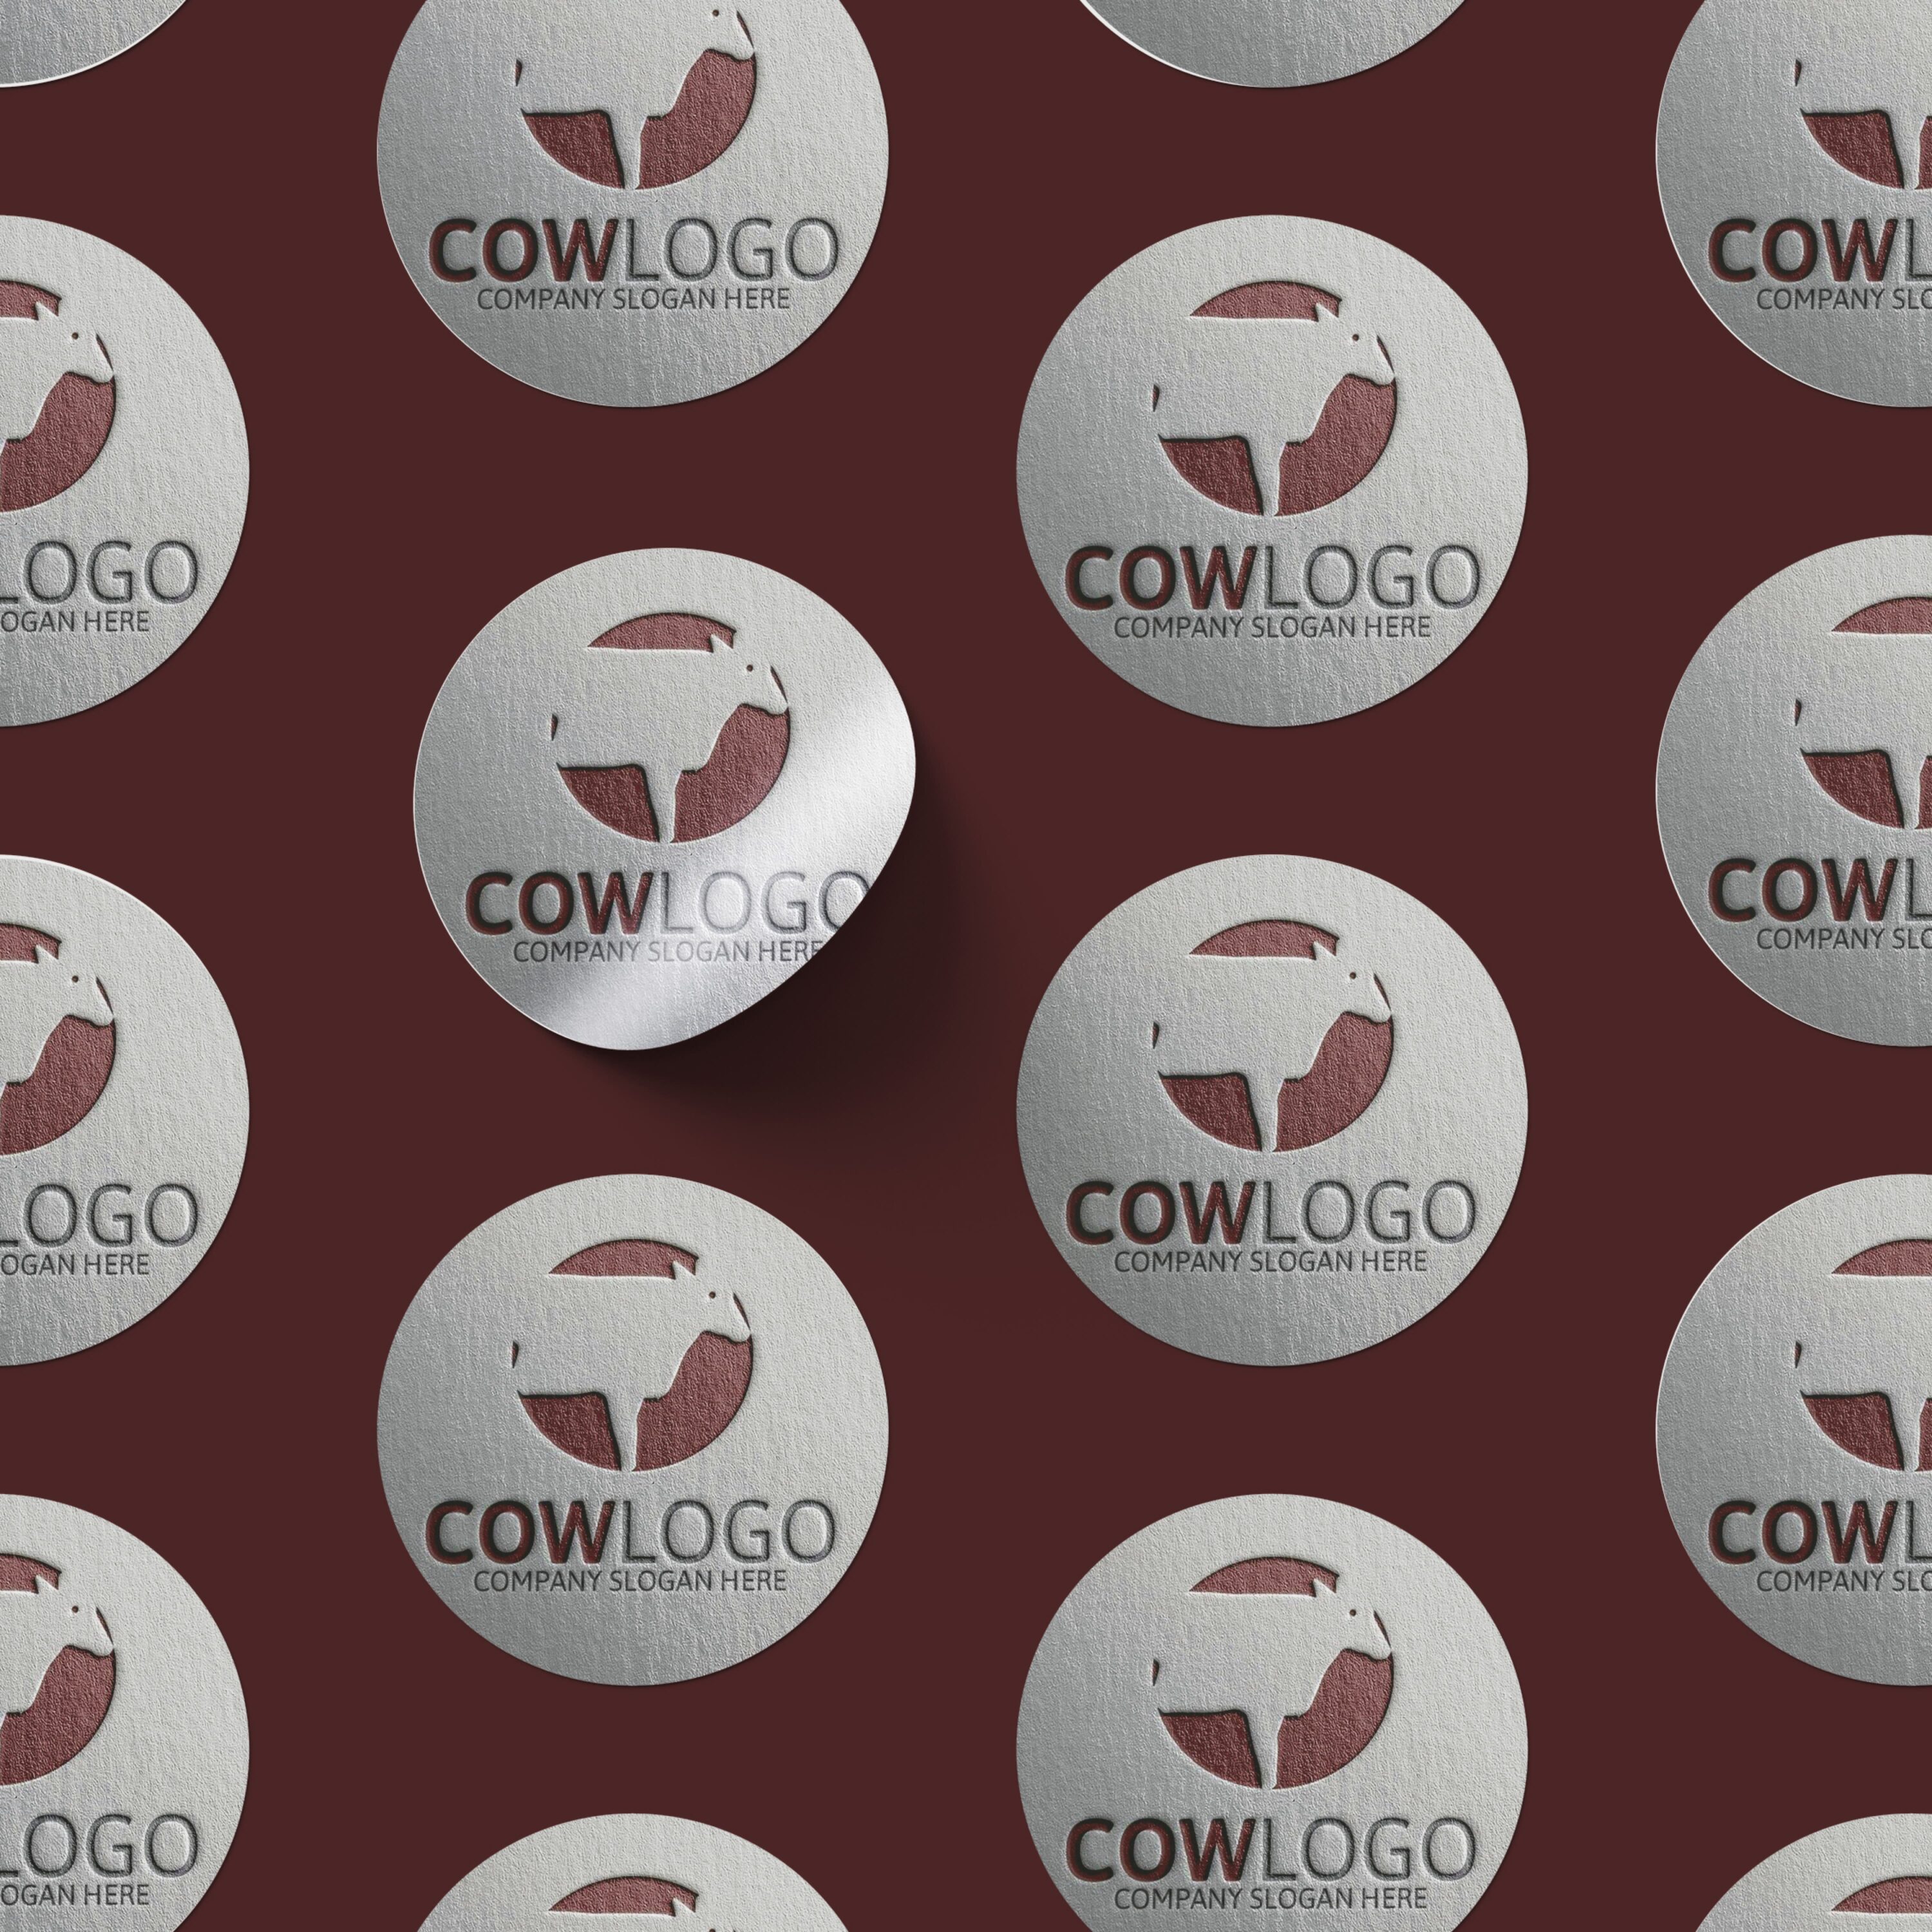 Cow Logo Template cover.